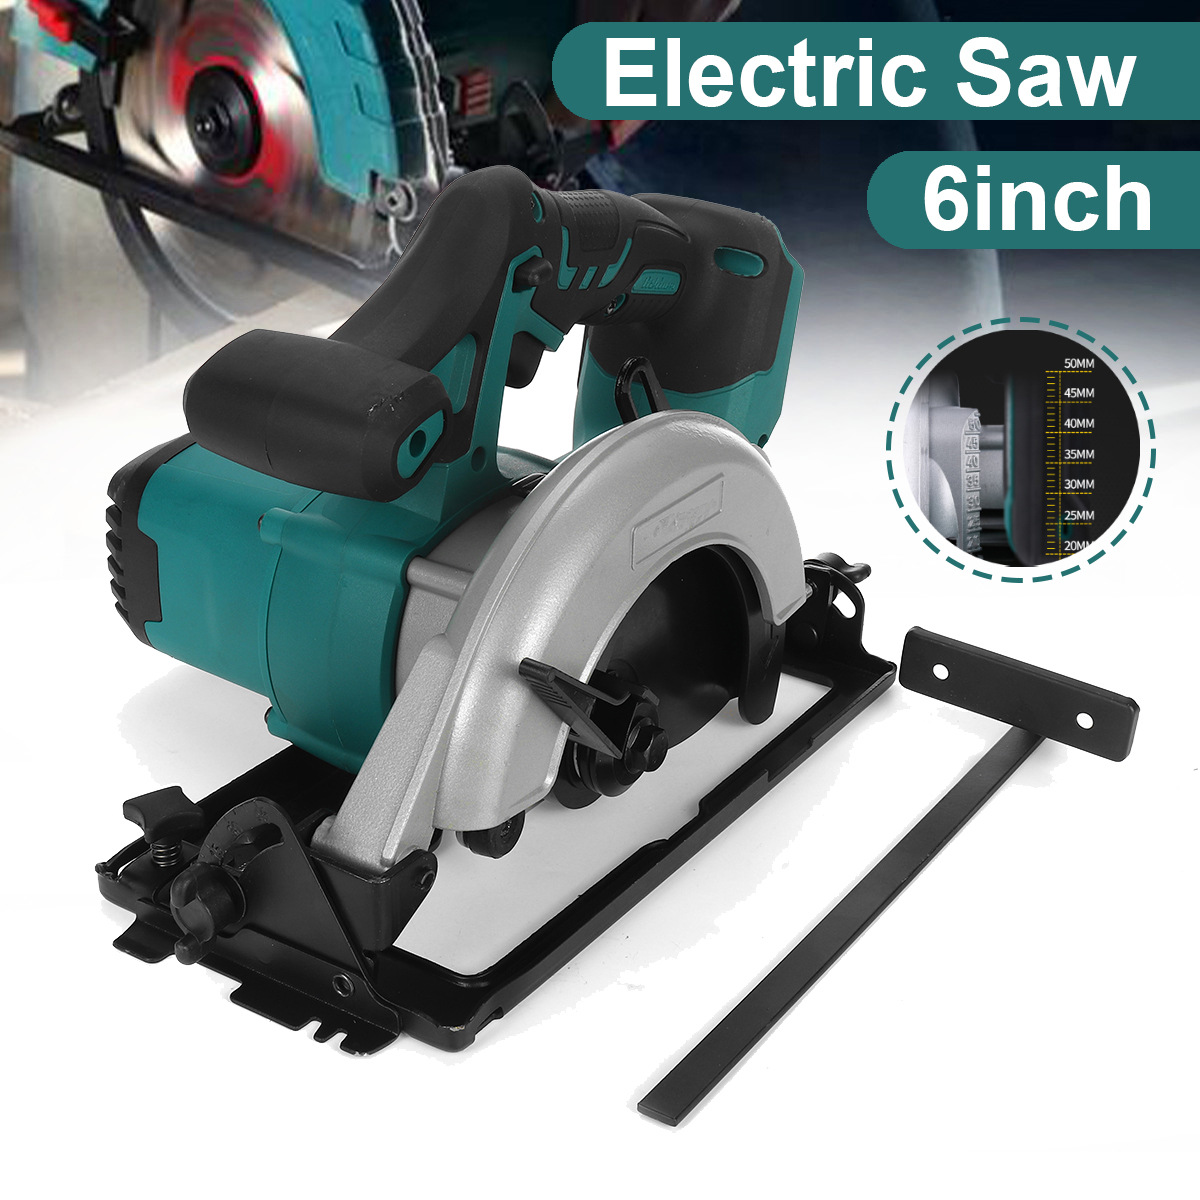 Drillpro-Electric-Circular-Saw-6Inch152mm-Power-Tools-3800RPM-Multifunction-Cutting-Machine-For-18V--1744309-1